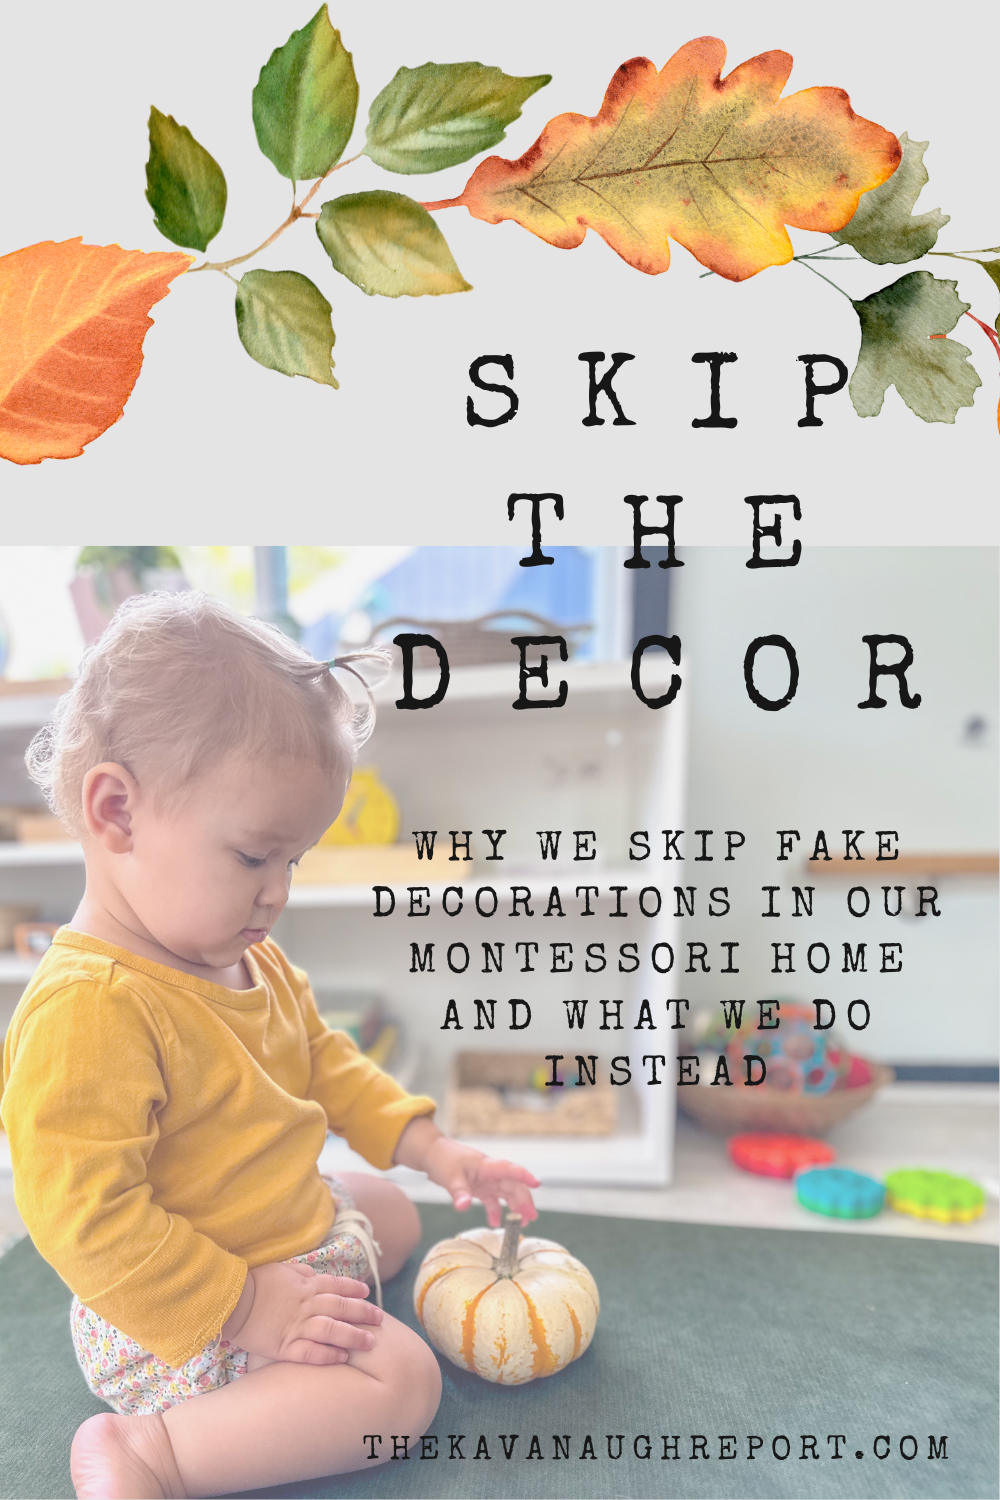 When everything is pumpkins and ghosts and fall, we are skipping the decorations in our Montessori home. Here's what we are doing instead!